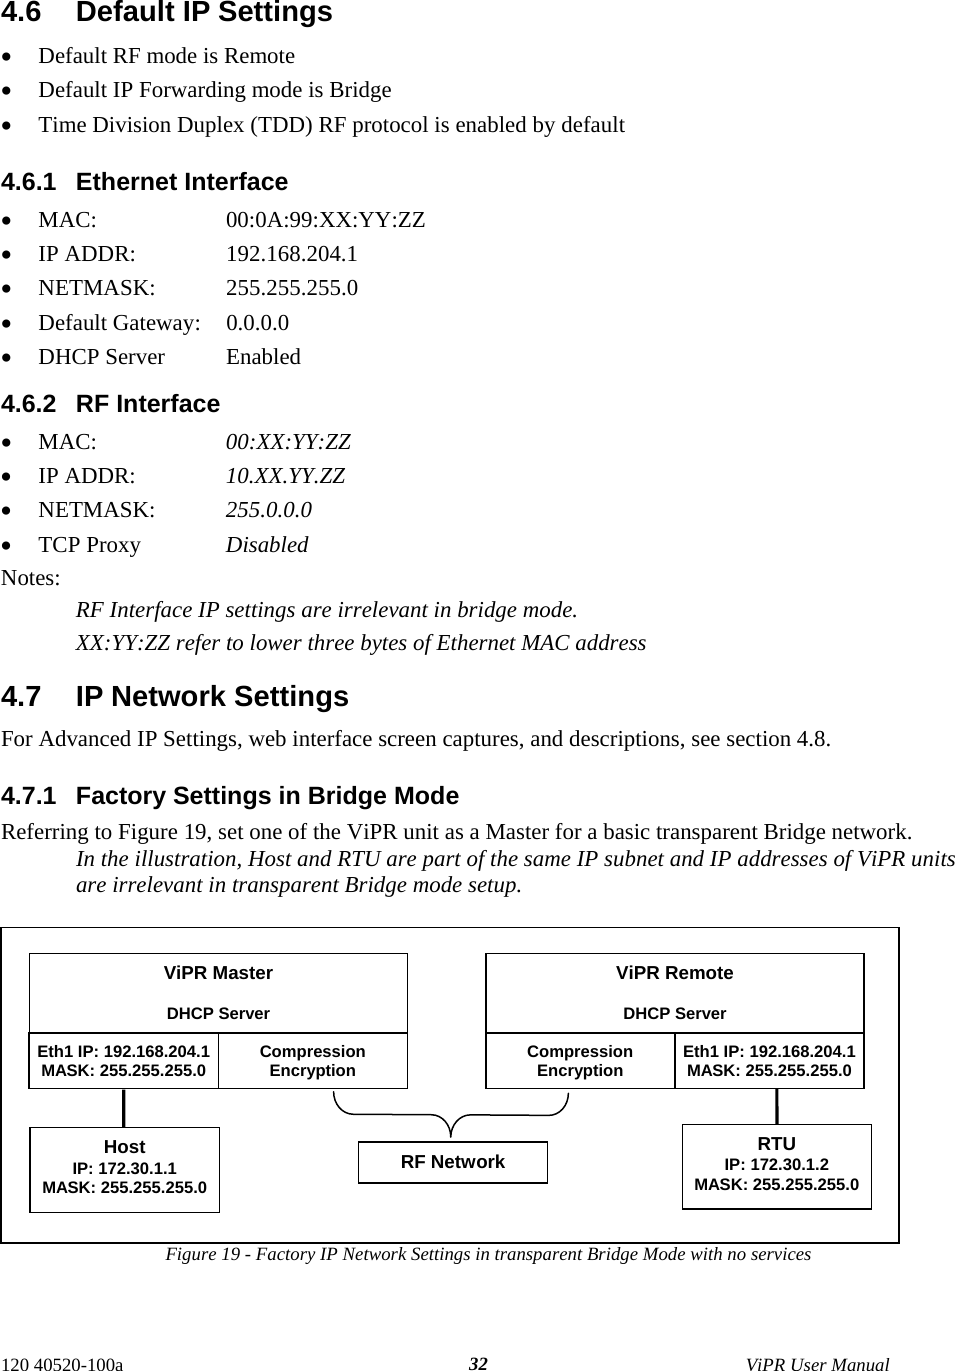  4.6  Default IP Settings •  Default RF mode is Remote  •  Default IP Forwarding mode is Bridge •  Time Division Duplex (TDD) RF protocol is enabled by default 4.6.1 Ethernet Interface •  MAC:     00:0A:99:XX:YY:ZZ •  IP ADDR:    192.168.204.1 •  NETMASK:   255.255.255.0 •  Default Gateway:   0.0.0.0 •  DHCP Server  Enabled 4.6.2 RF Interface •  MAC:     00:XX:YY:ZZ •  IP ADDR:    10.XX.YY.ZZ •  NETMASK:   255.0.0.0 •  TCP Proxy    Disabled Notes: RF Interface IP settings are irrelevant in bridge mode. XX:YY:ZZ refer to lower three bytes of Ethernet MAC address 4.7  IP Network Settings For Advanced IP Settings, web interface screen captures, and descriptions, see section 4.8. 4.7.1  Factory Settings in Bridge Mode Referring to Figure 19, set one of the ViPR unit as a Master for a basic transparent Bridge network. In the illustration, Host and RTU are part of the same IP subnet and IP addresses of ViPR units are irrelevant in transparent Bridge mode setup. Figure 19 - Factory IP Network Settings in transparent Bridge Mode with no services  ViPR Master  DHCP Server Eth1 IP: 192.168.204.1 MASK: 255.255.255.0  Compression Encryption ViPR Remote  DHCP Server Compression Encryption Eth1 IP: 192.168.204.1 MASK: 255.255.255.0 RF Network Host IP: 172.30.1.1 MASK: 255.255.255.0 RTU IP: 172.30.1.2 MASK: 255.255.255.0 120 40520-100a    ViPR User Manual  32